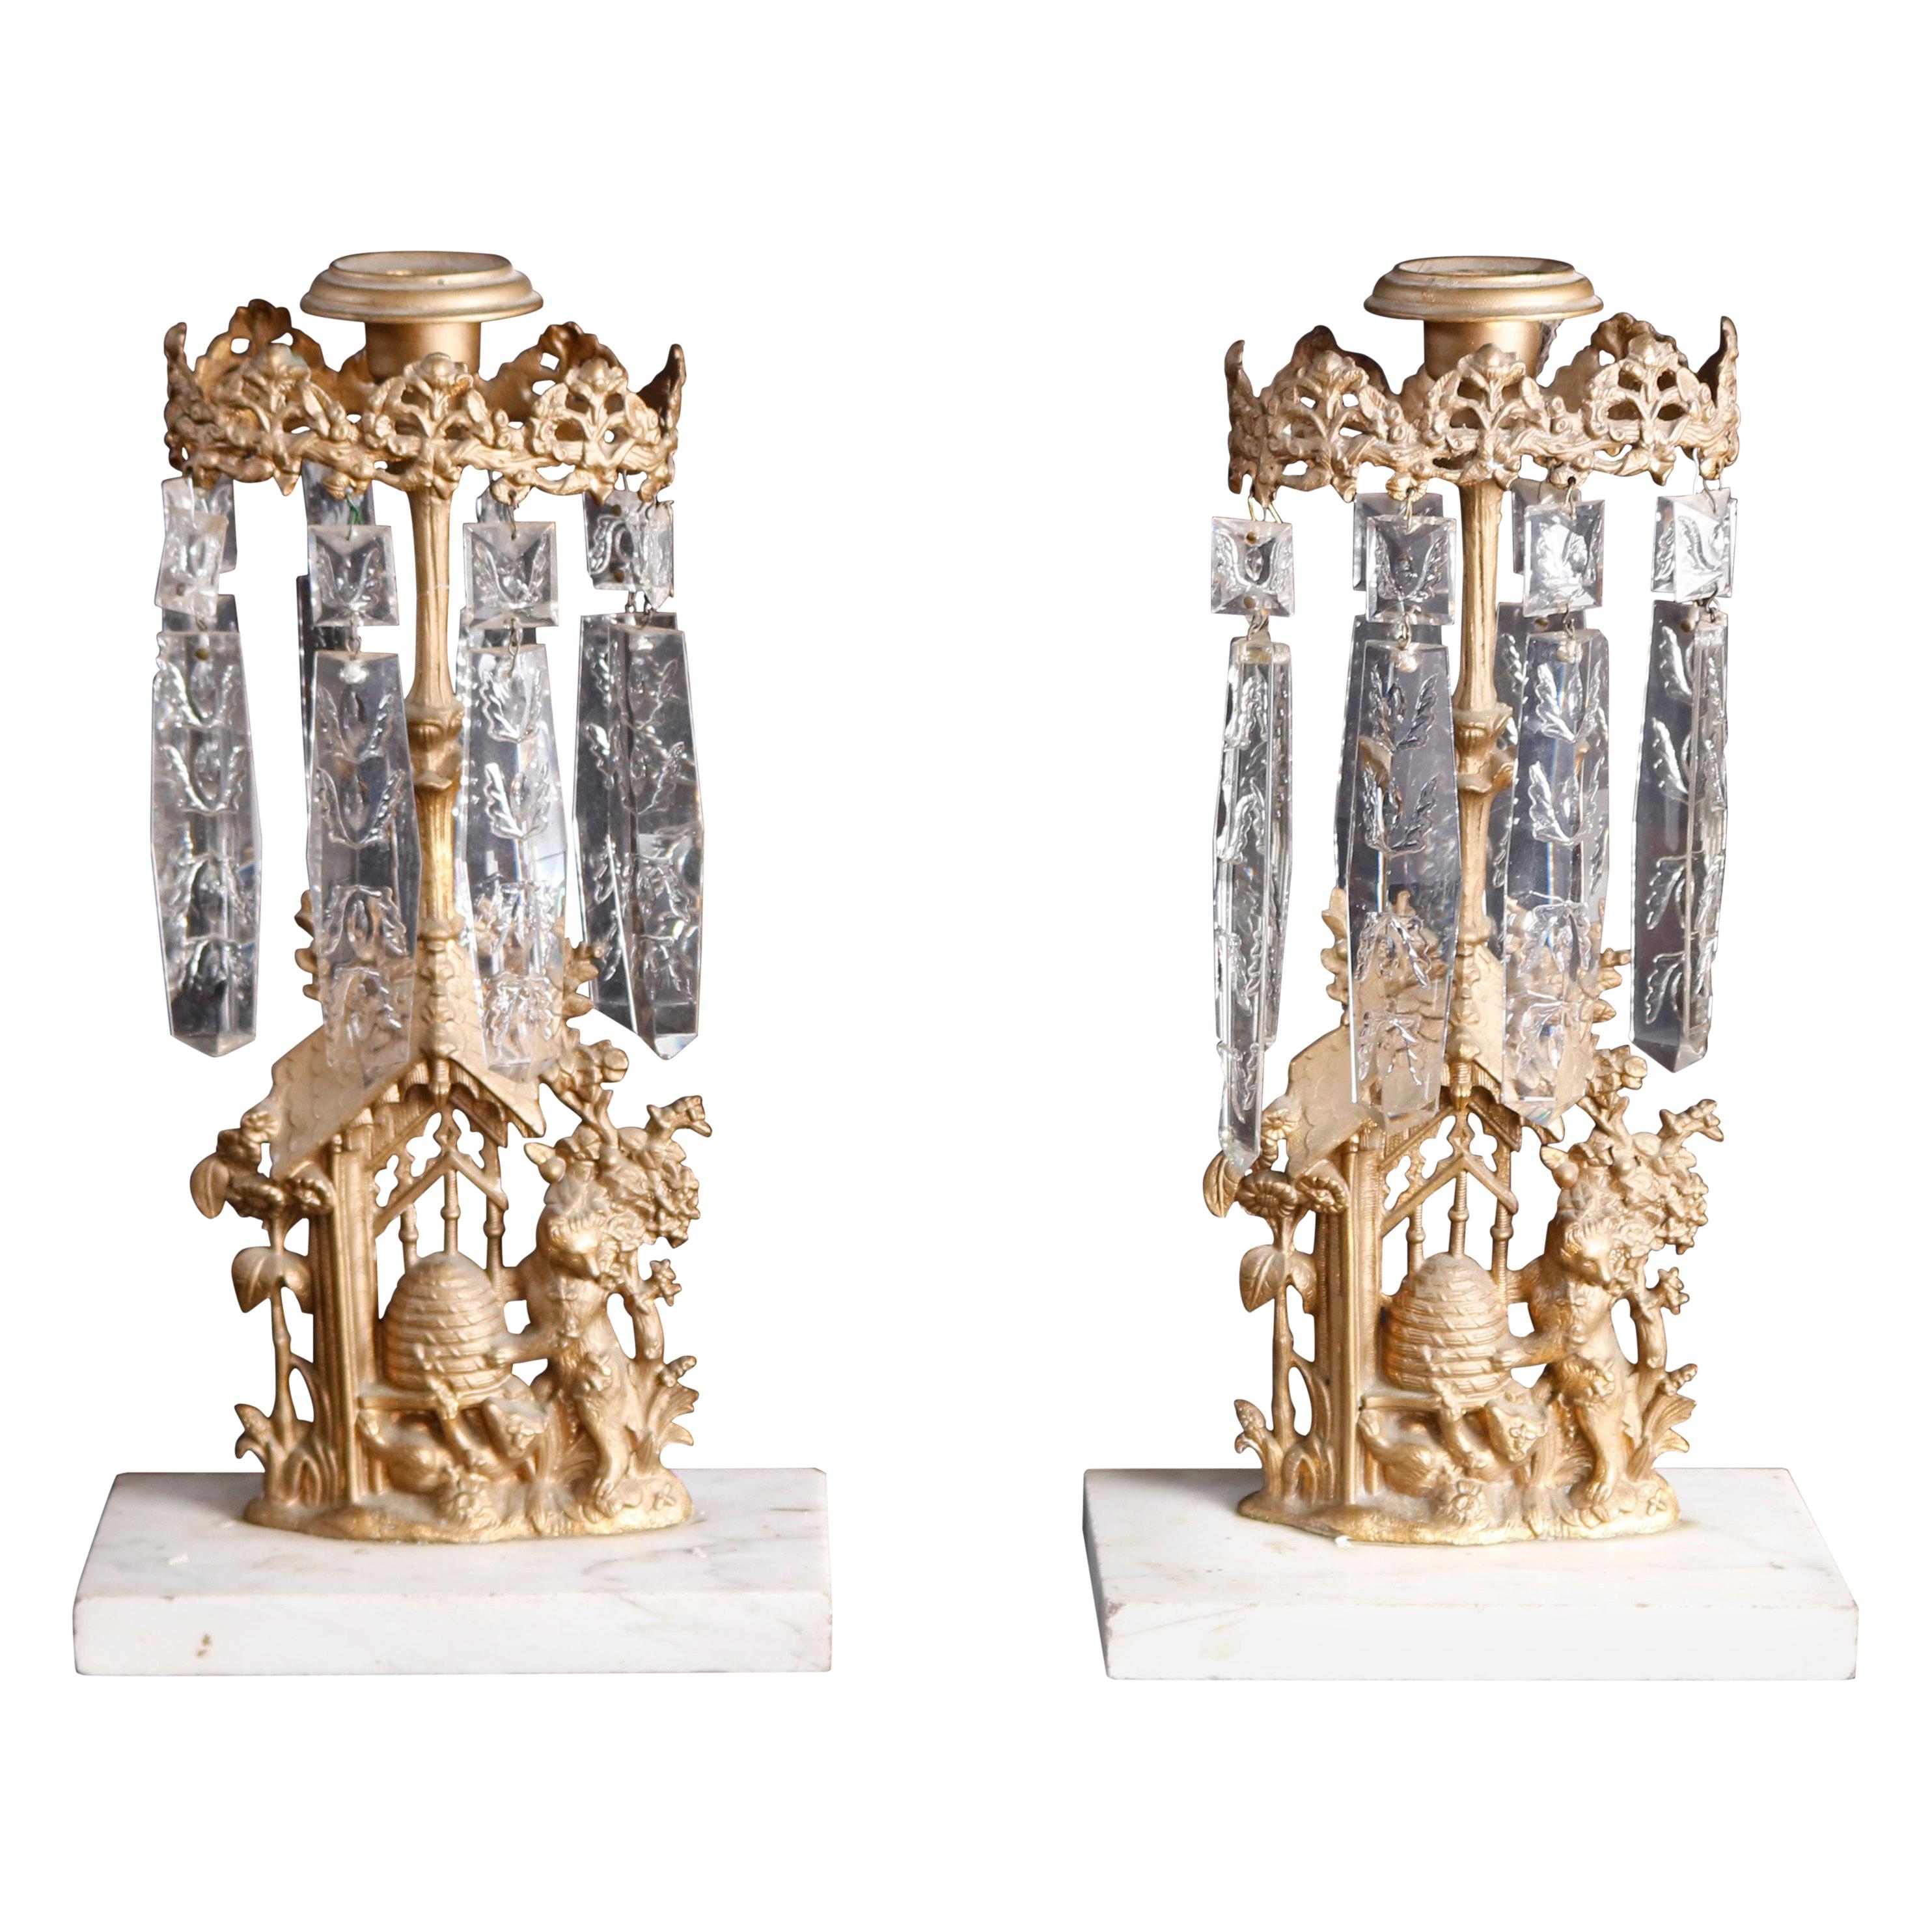 Pair of Girandole Crystal and Gilt Metal Candelabra with Beehive, c1890